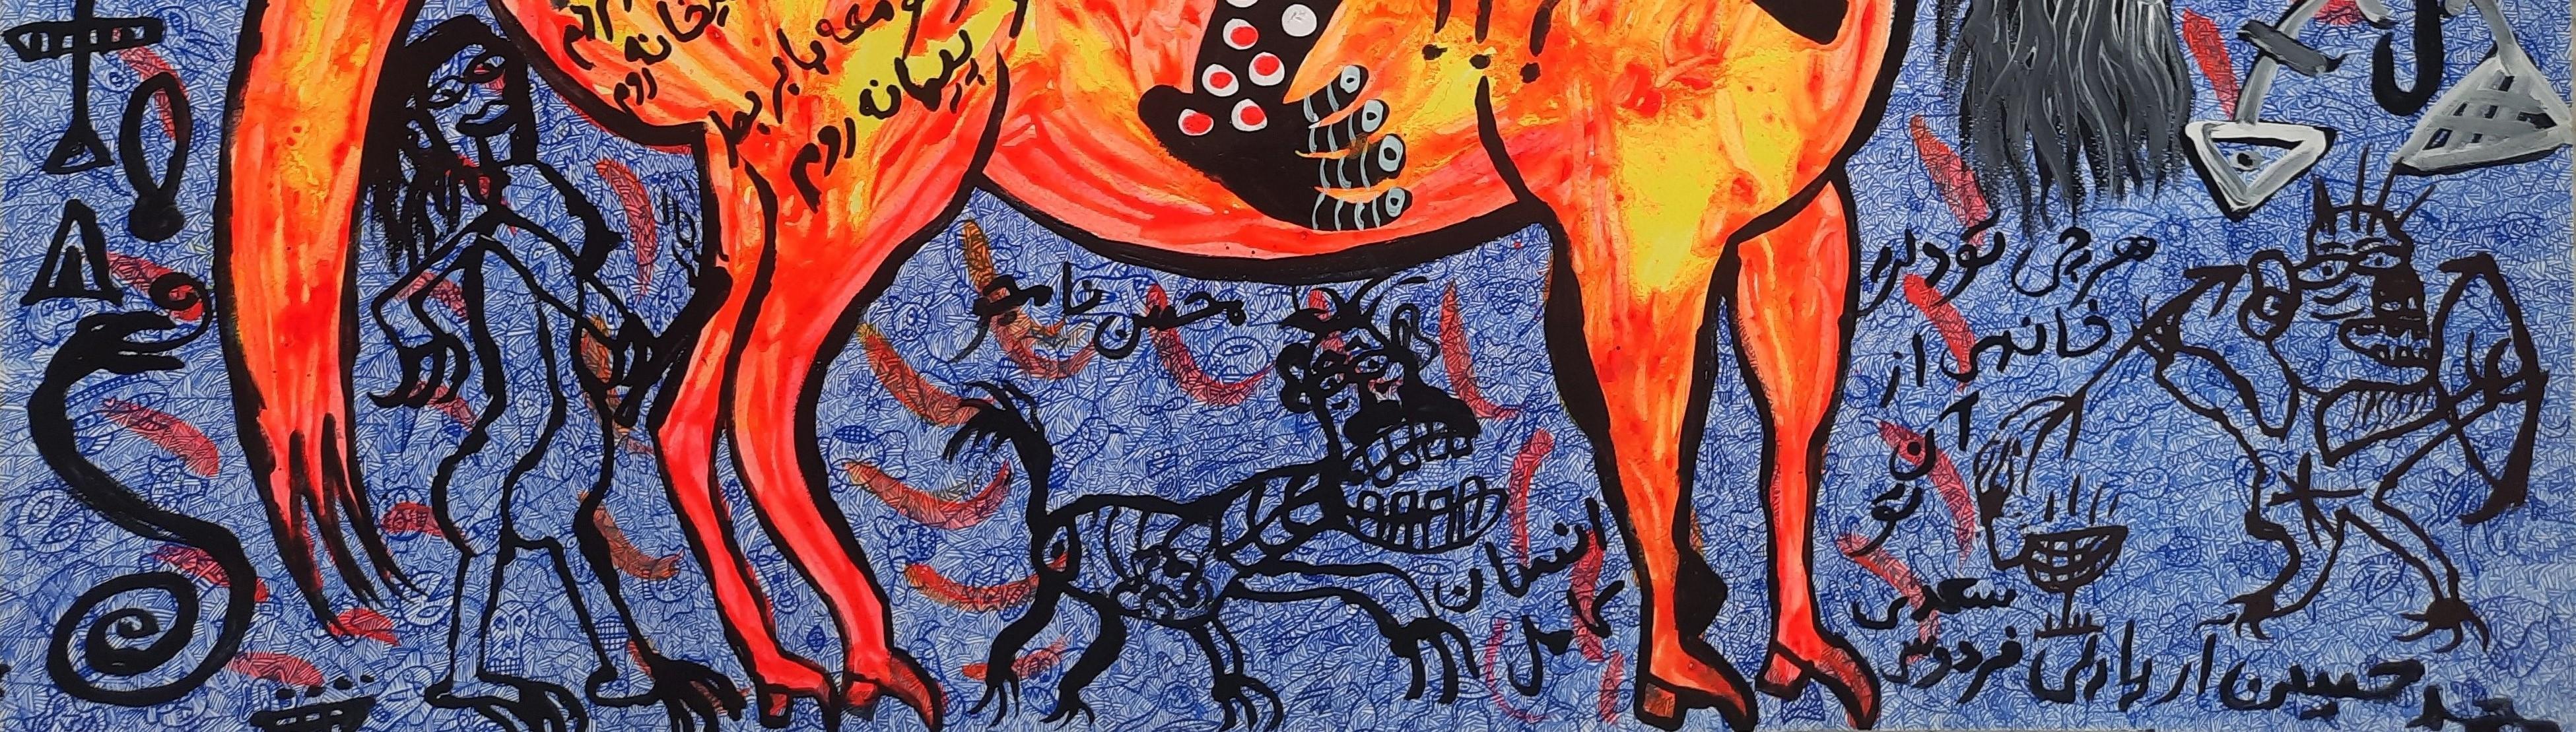 Acrylic paint on paper
Hand-signed lower right

« Here the barbaric or savage ceremonies of New Guinea take on the air of Rio carnival.
Here the vitality bursts and the colors dance the jig while thundering.
A charivari of African masks, children's